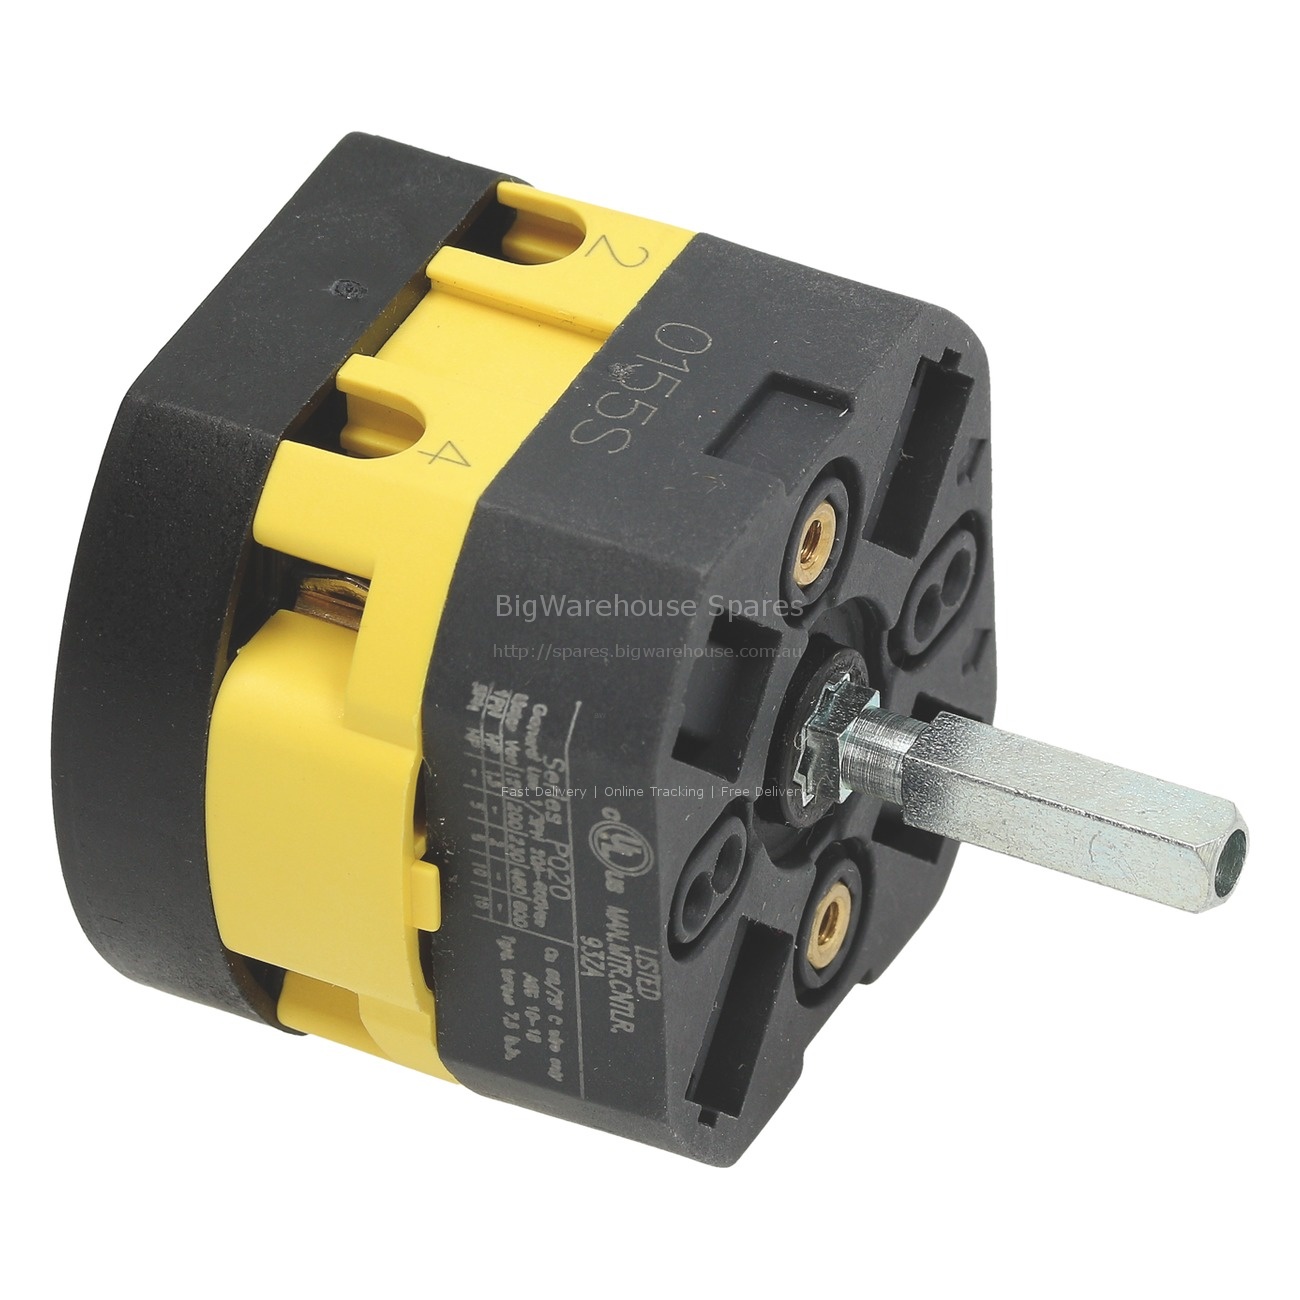 SELECTOR SWITCH 0-1 POSITIONS 16A 500V